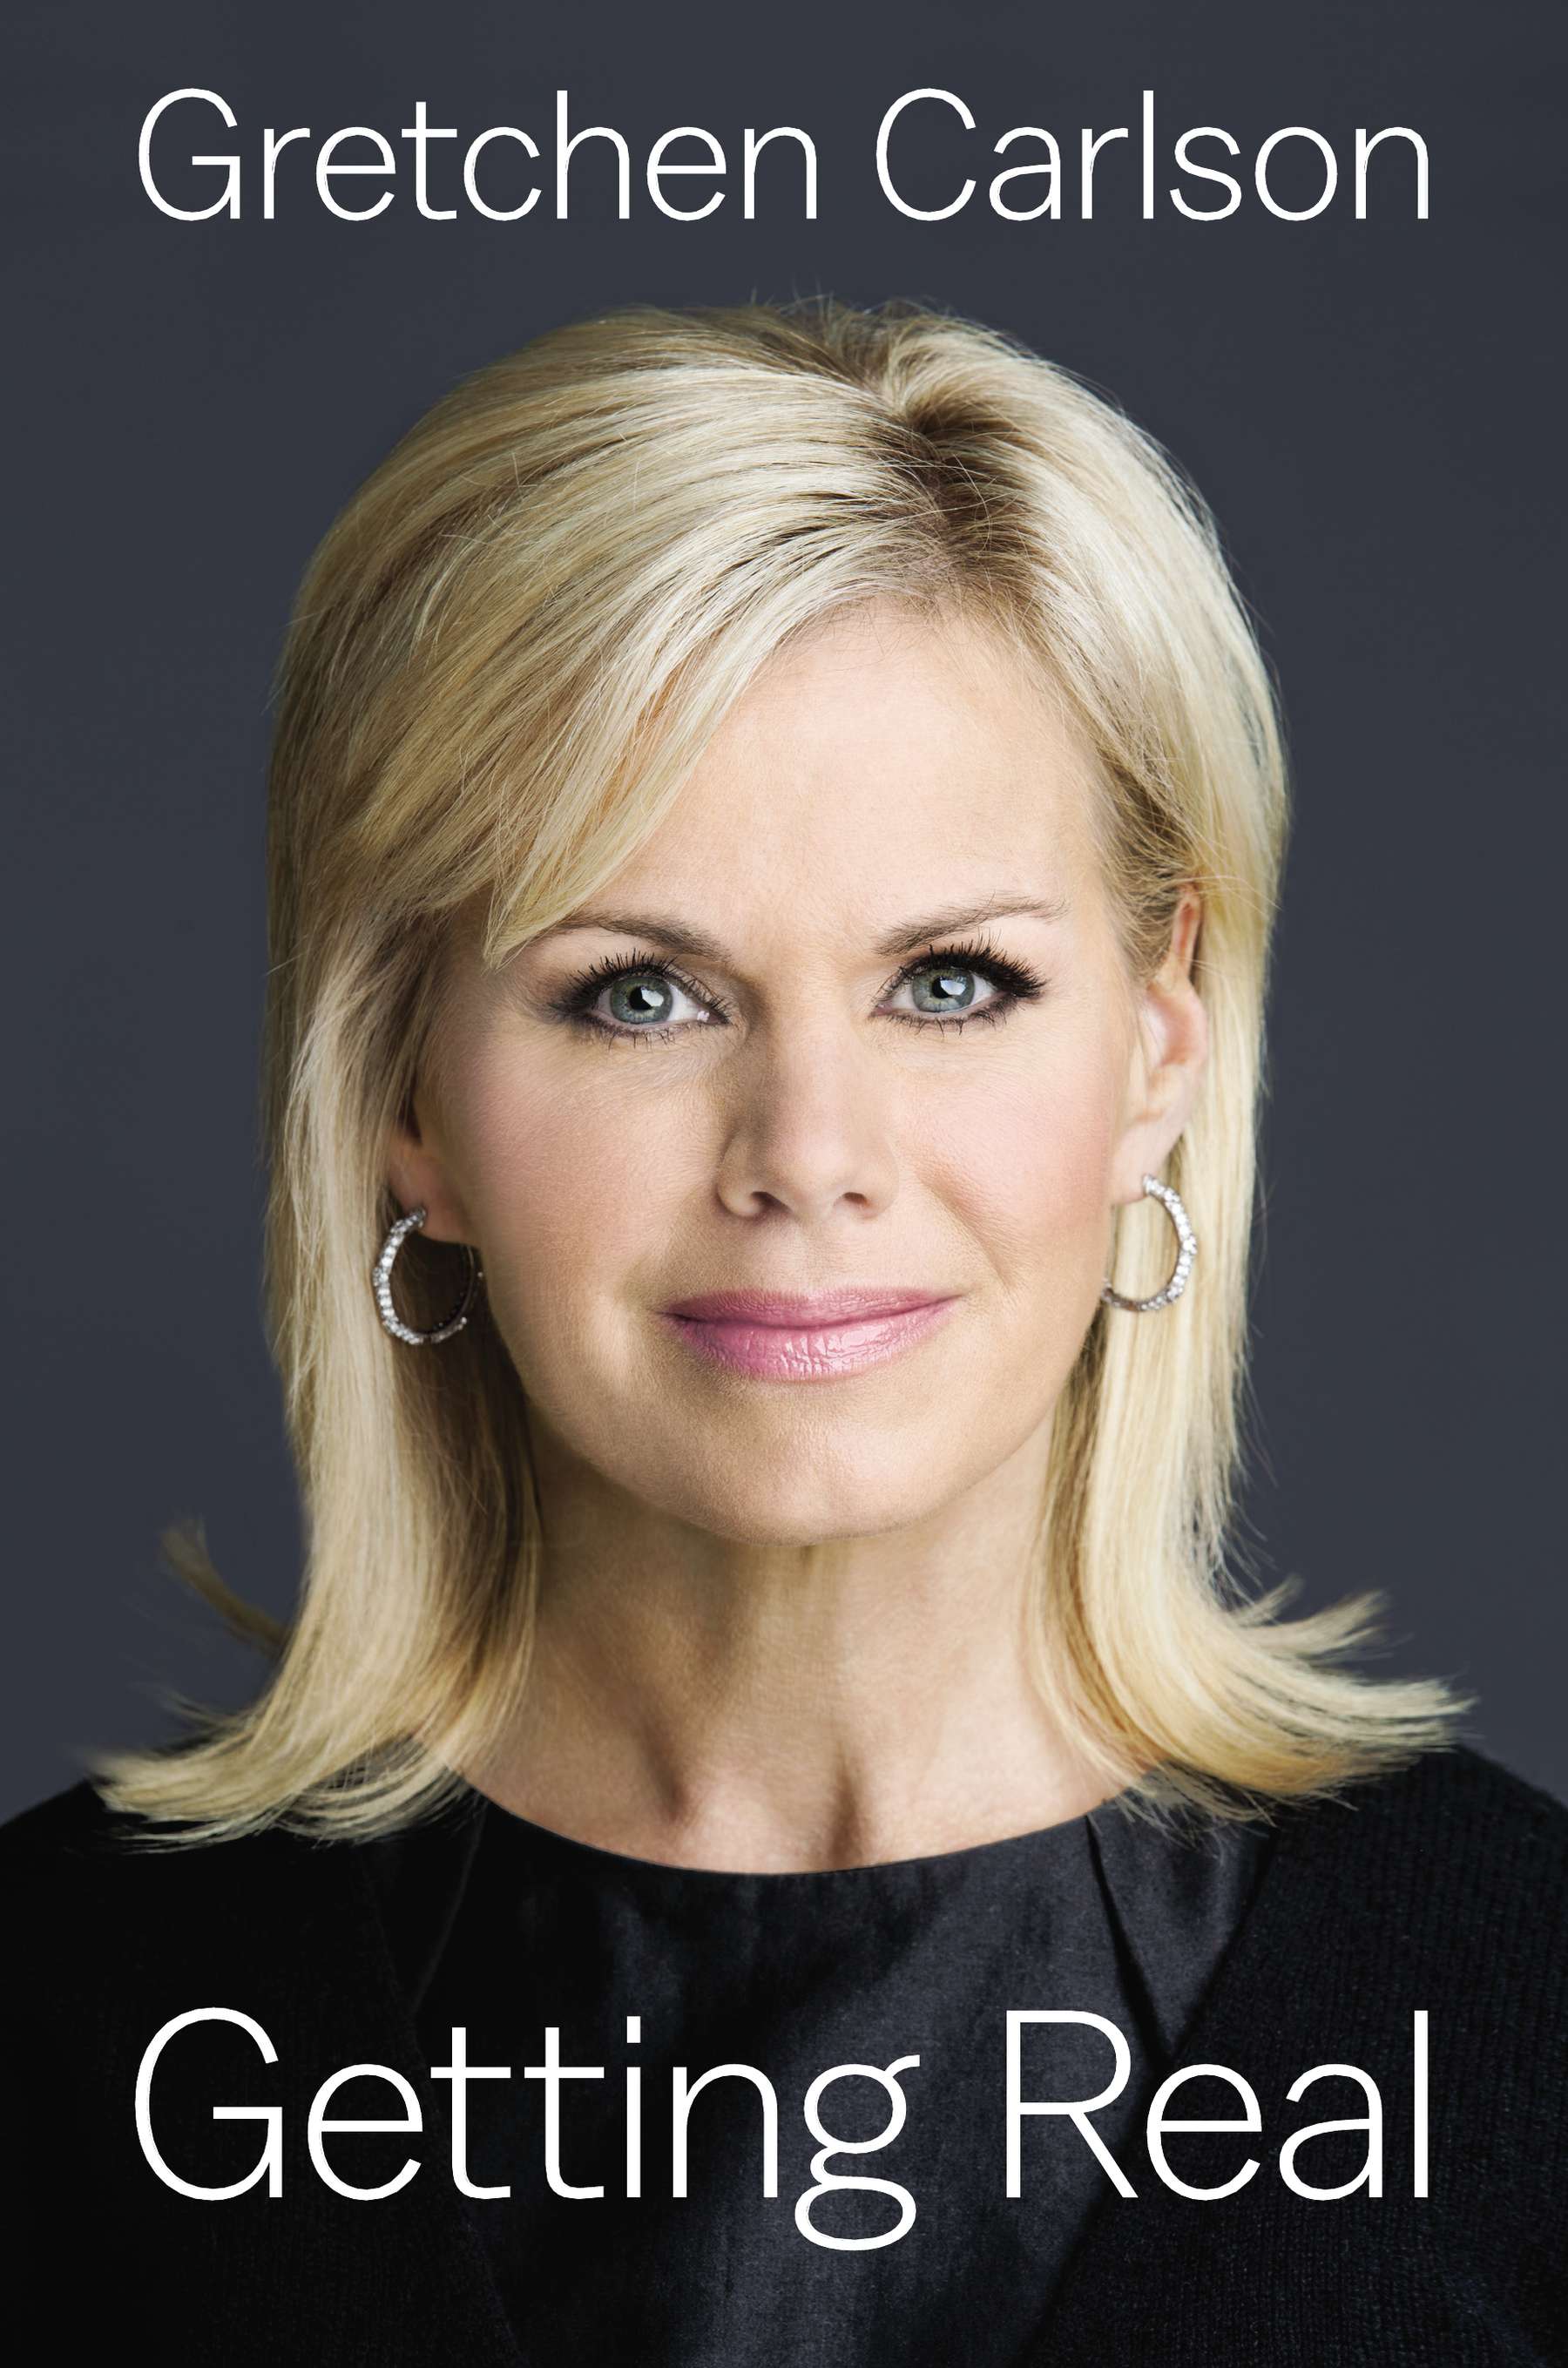 Fox S Gretchen Carlson Writes About Getting Fired In New Book